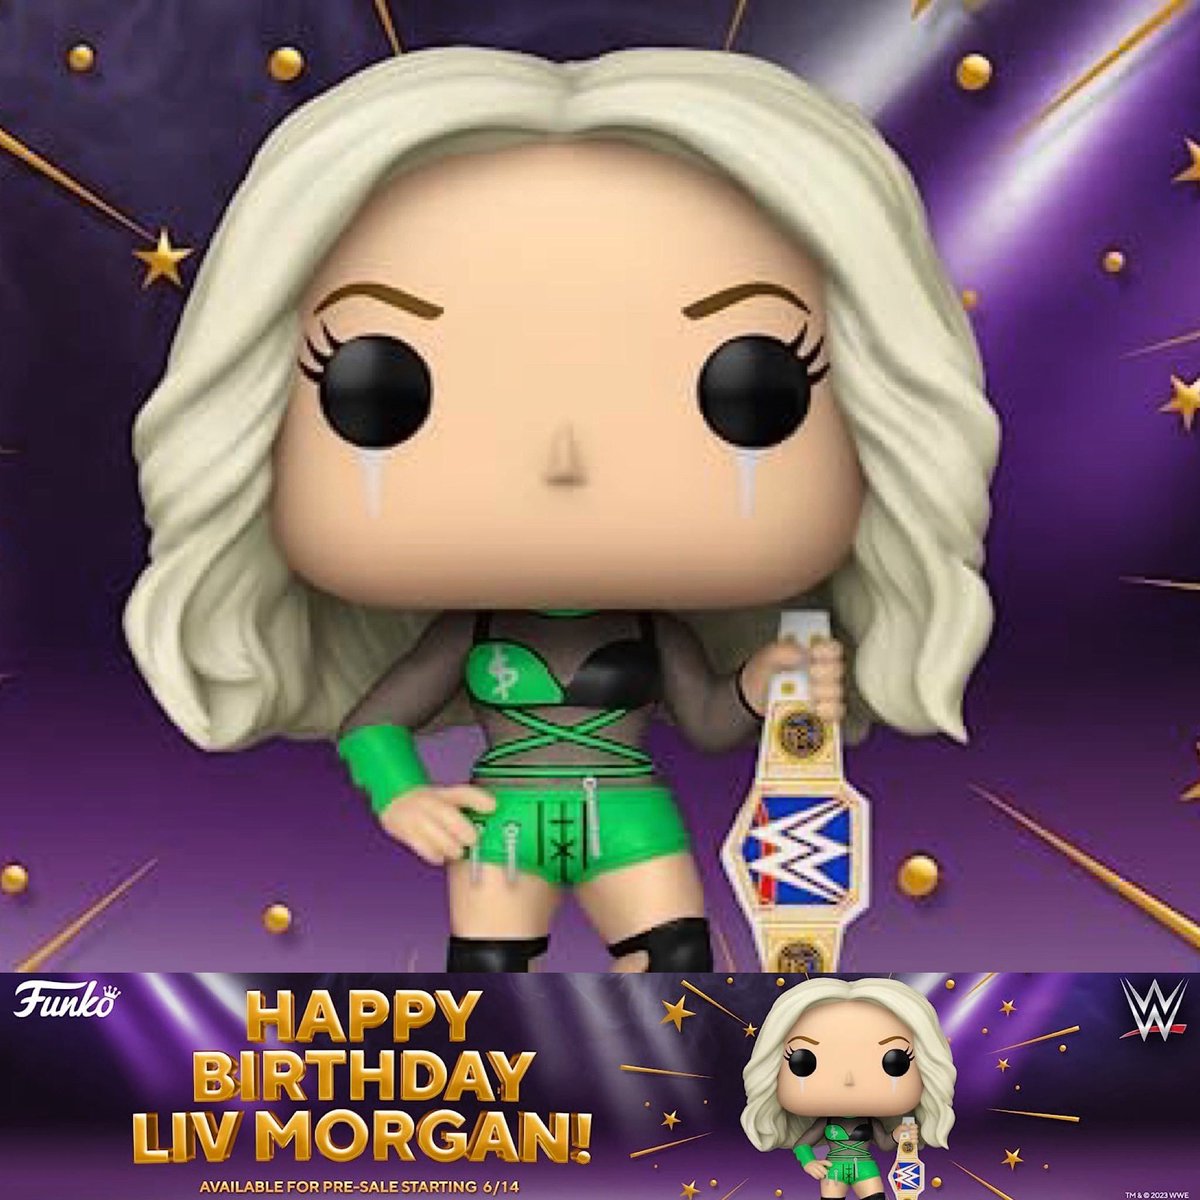 Happy Birthday @yaonlylivvonce 

New Liv Morgan Funko Pop! Vinyl available for pre-order June 14th!

Join WhatNot @ WHATHEEL.com & get a $15 credit to use!

#figheel #wrestlingfigures #wwe #wweelitesquad #aew #aewunrivaled #actionfigures #toycollector